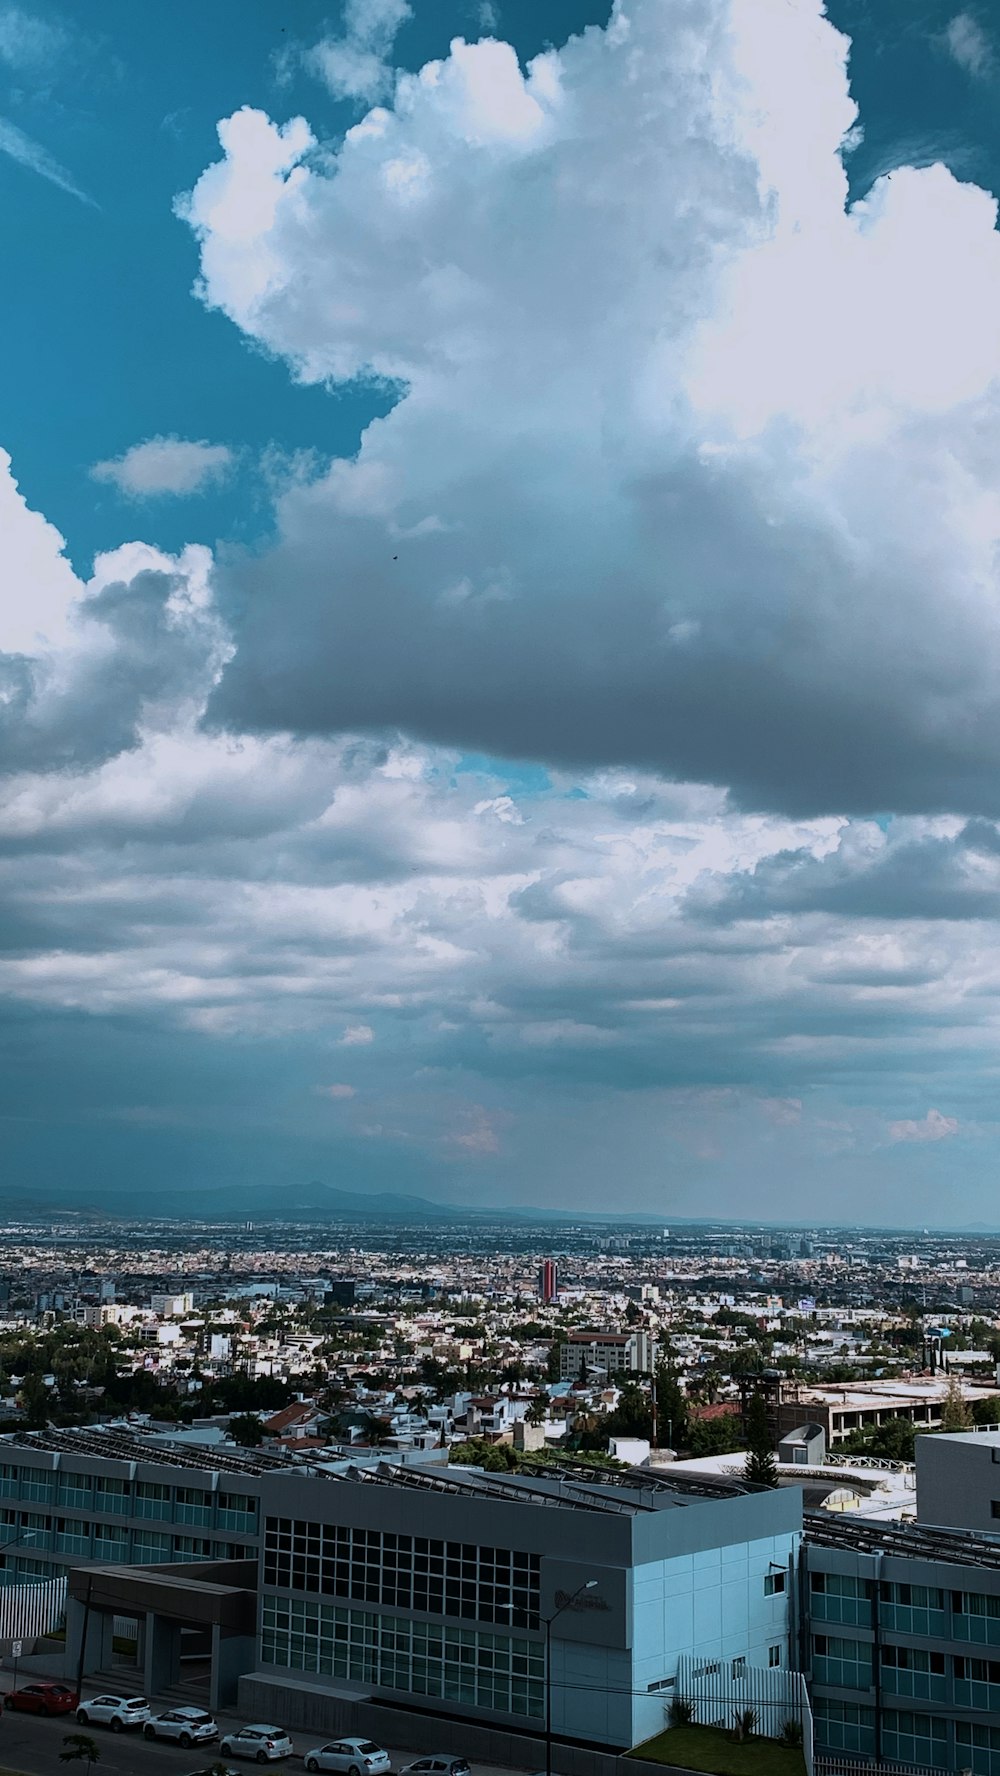 photography of city escape under blue cloudy sky